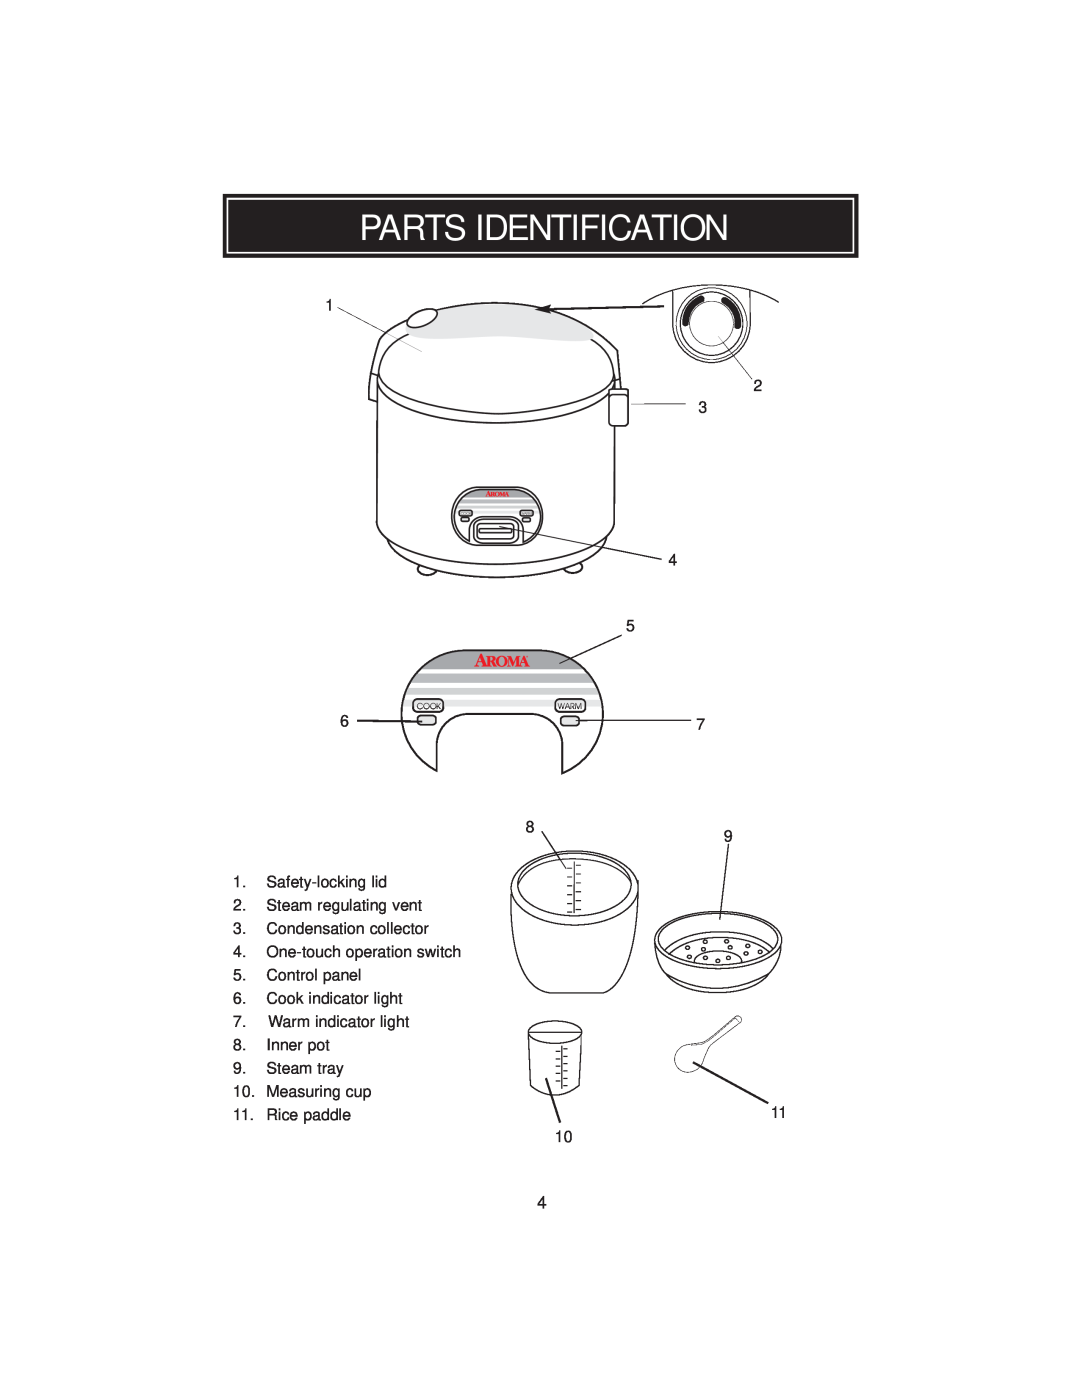 Aroma ARC3946 Parts Identification, Safety-locking lid 2. Steam regulating vent, Inner pot 9. Steam tray 10. Measuring cup 